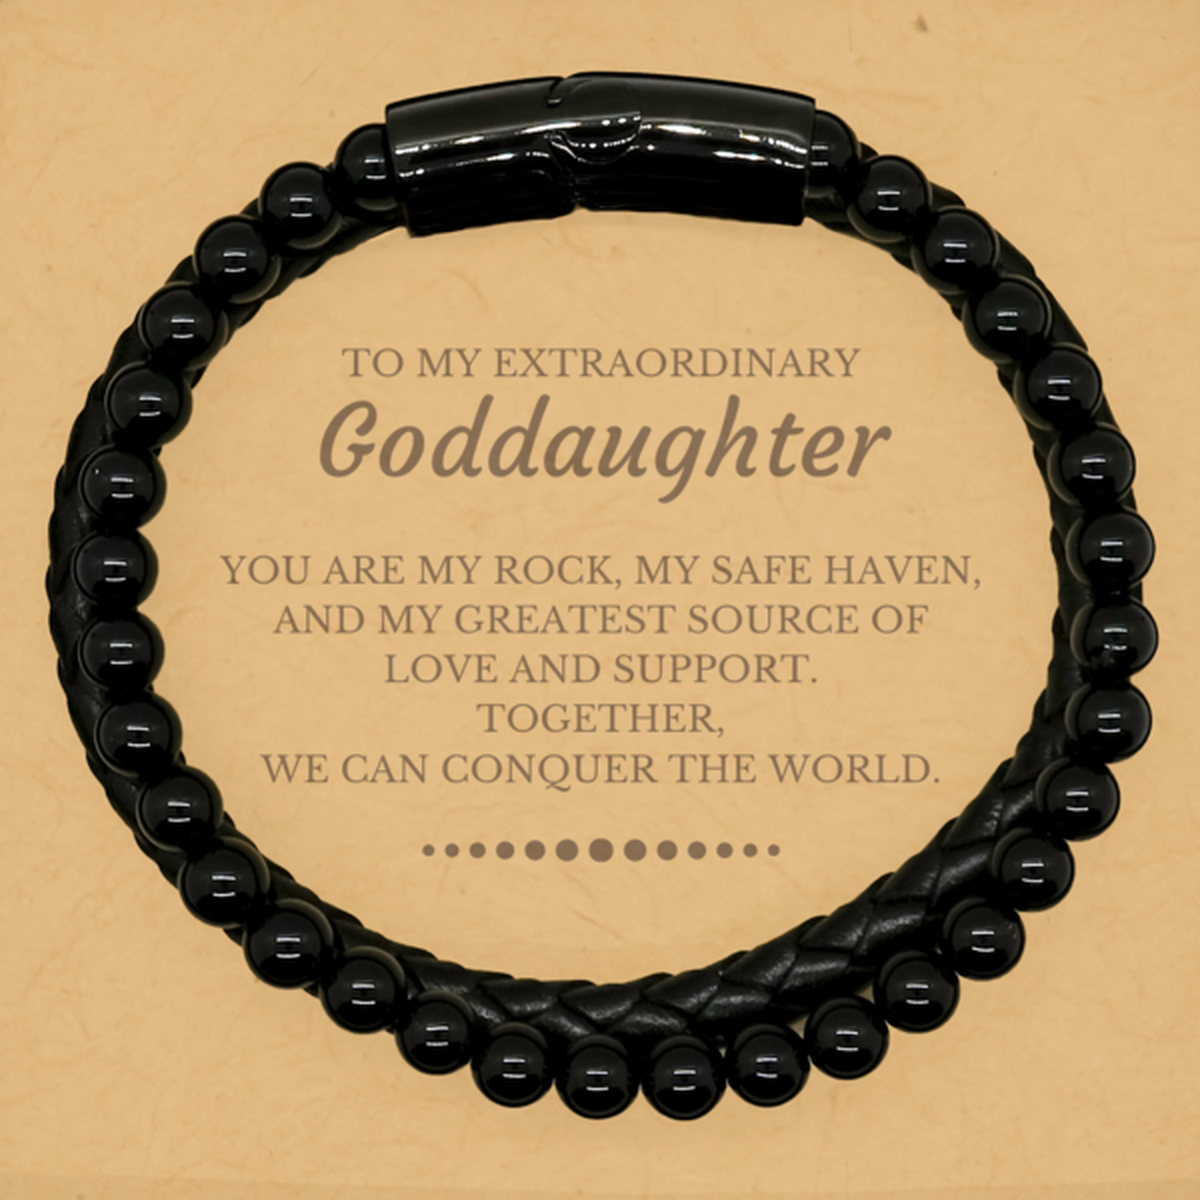 To My Extraordinary Goddaughter Gifts, Together, we can conquer the world, Birthday Stone Leather Bracelets For Goddaughter, Christmas Gifts For Goddaughter